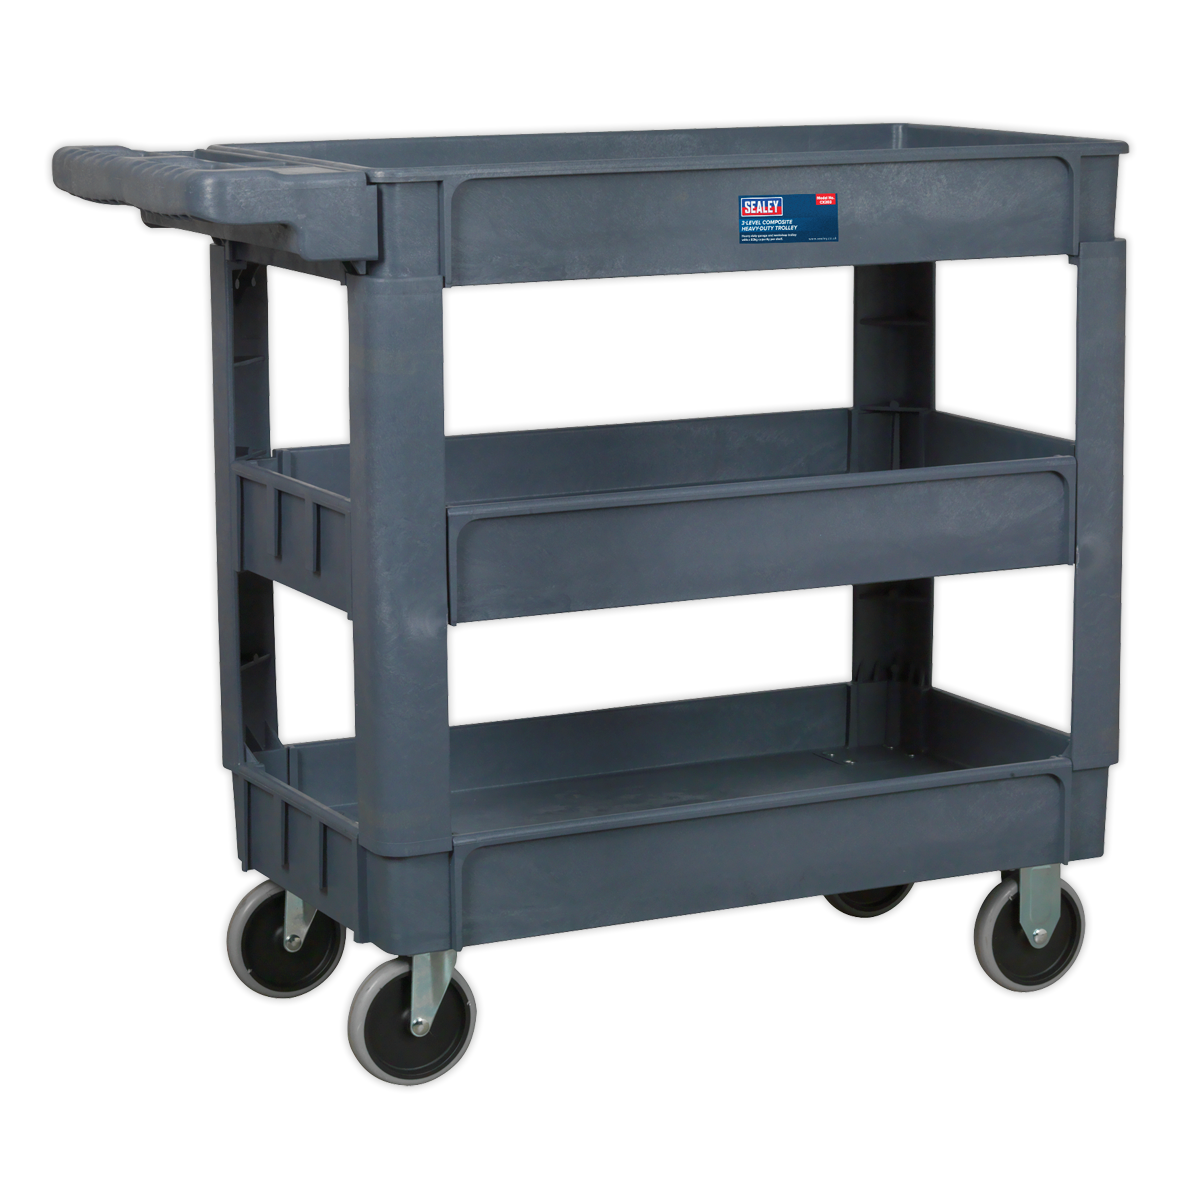 SEALEY TROLLEY WITH HANDLE 3-LEVEL COMPOSITE HEAVY DUTY